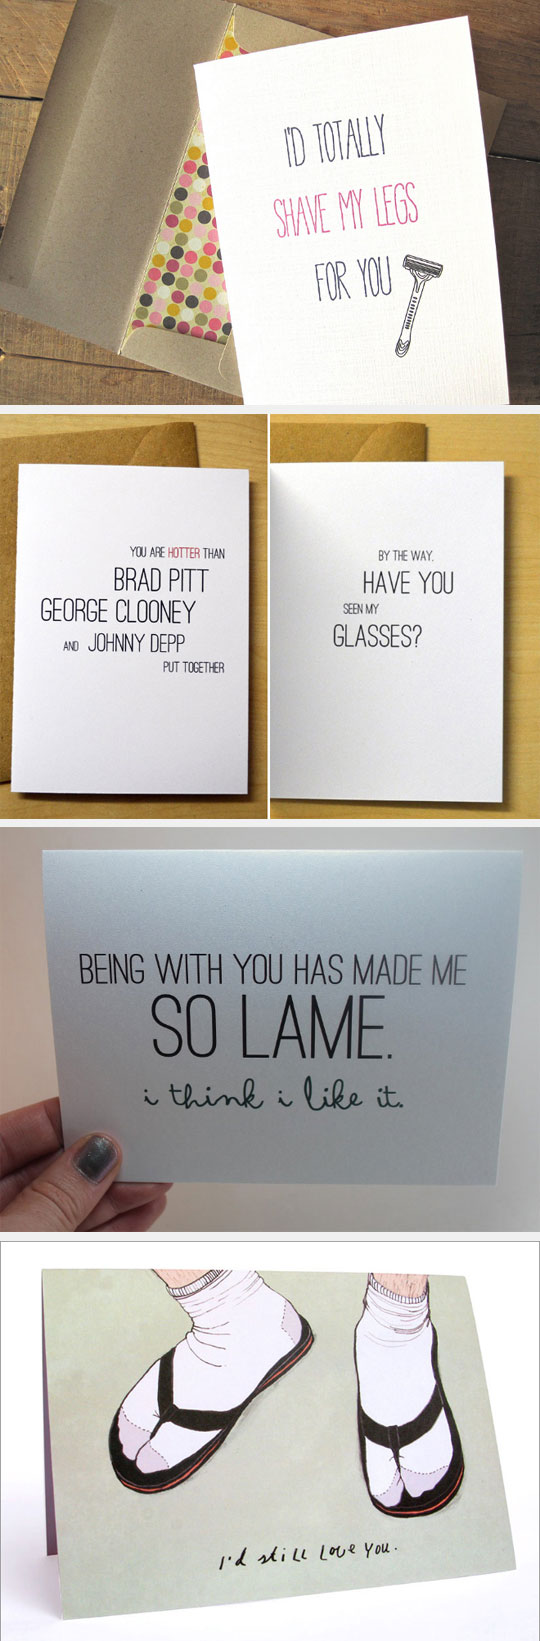 funny-romantic-greeting-cards-weird